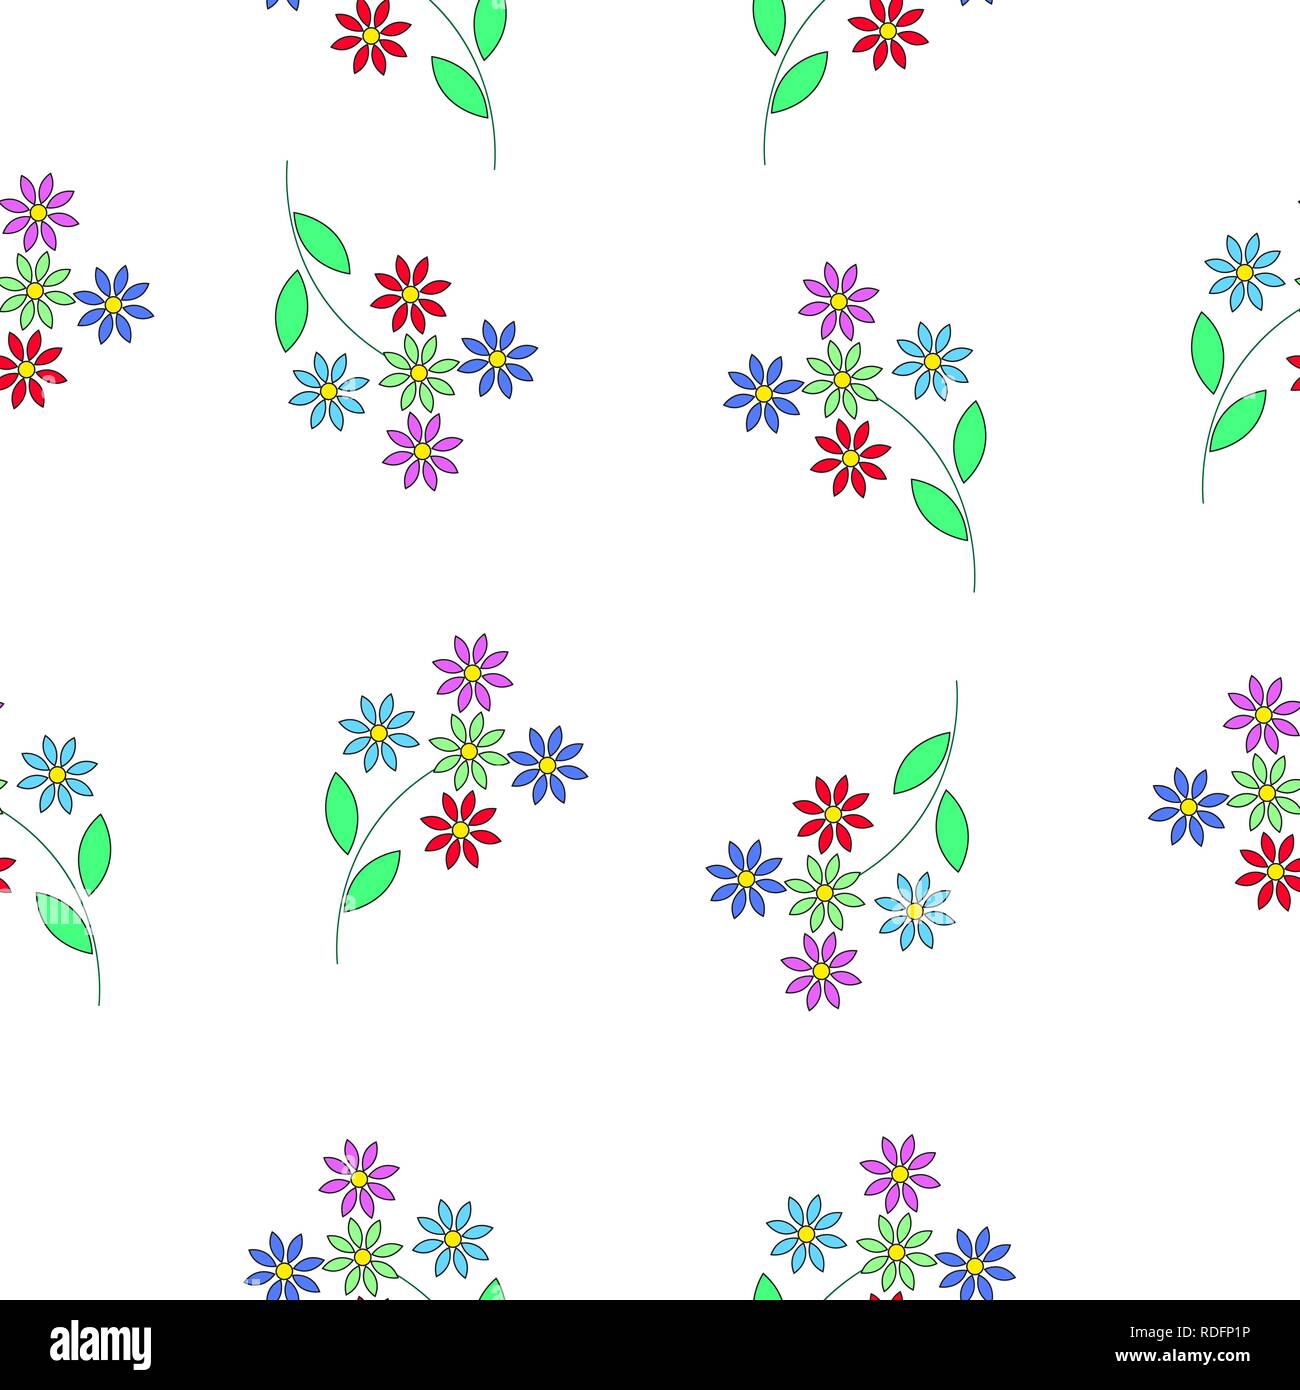 Seamless pattern of red, purple, green and blue flowers on fabric, etc. Stock Vector